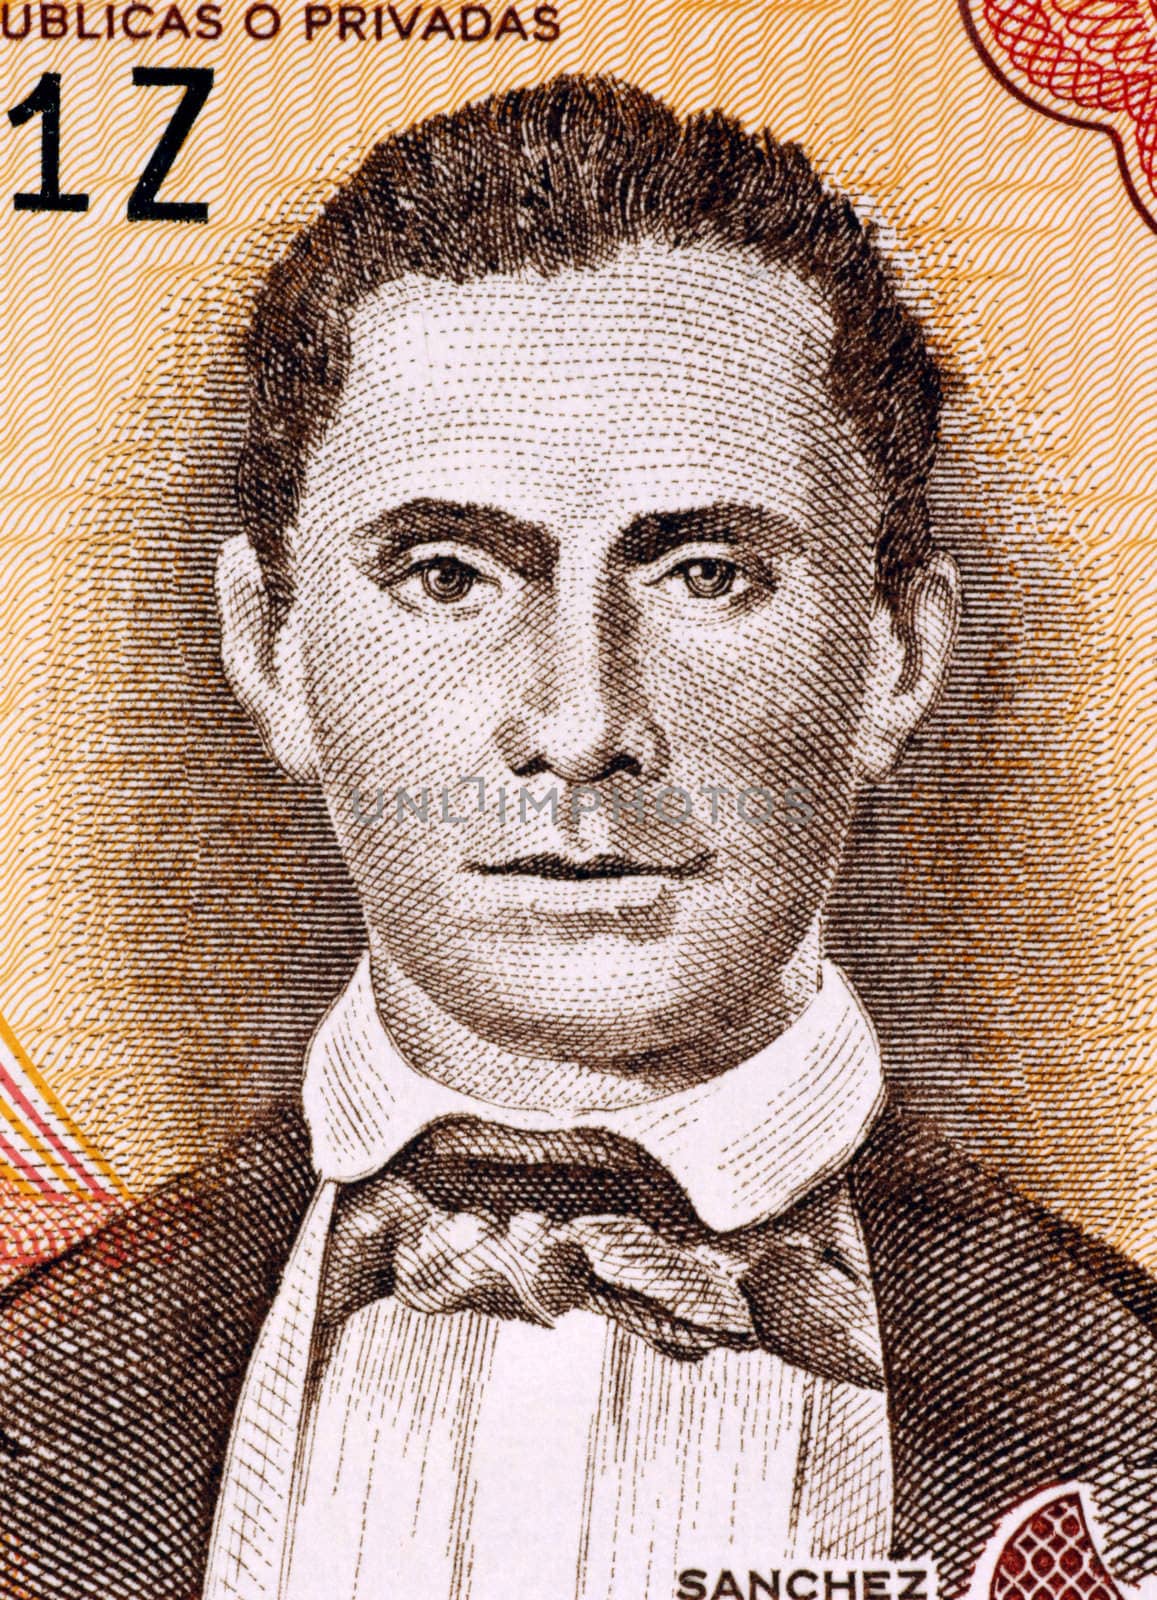 Jorge Noceda Sanchez (1931-1987) on 5 Pesos Oro 1997 Banknote from Dominican Republic. Painter whose works are collected by museums throughout the world.